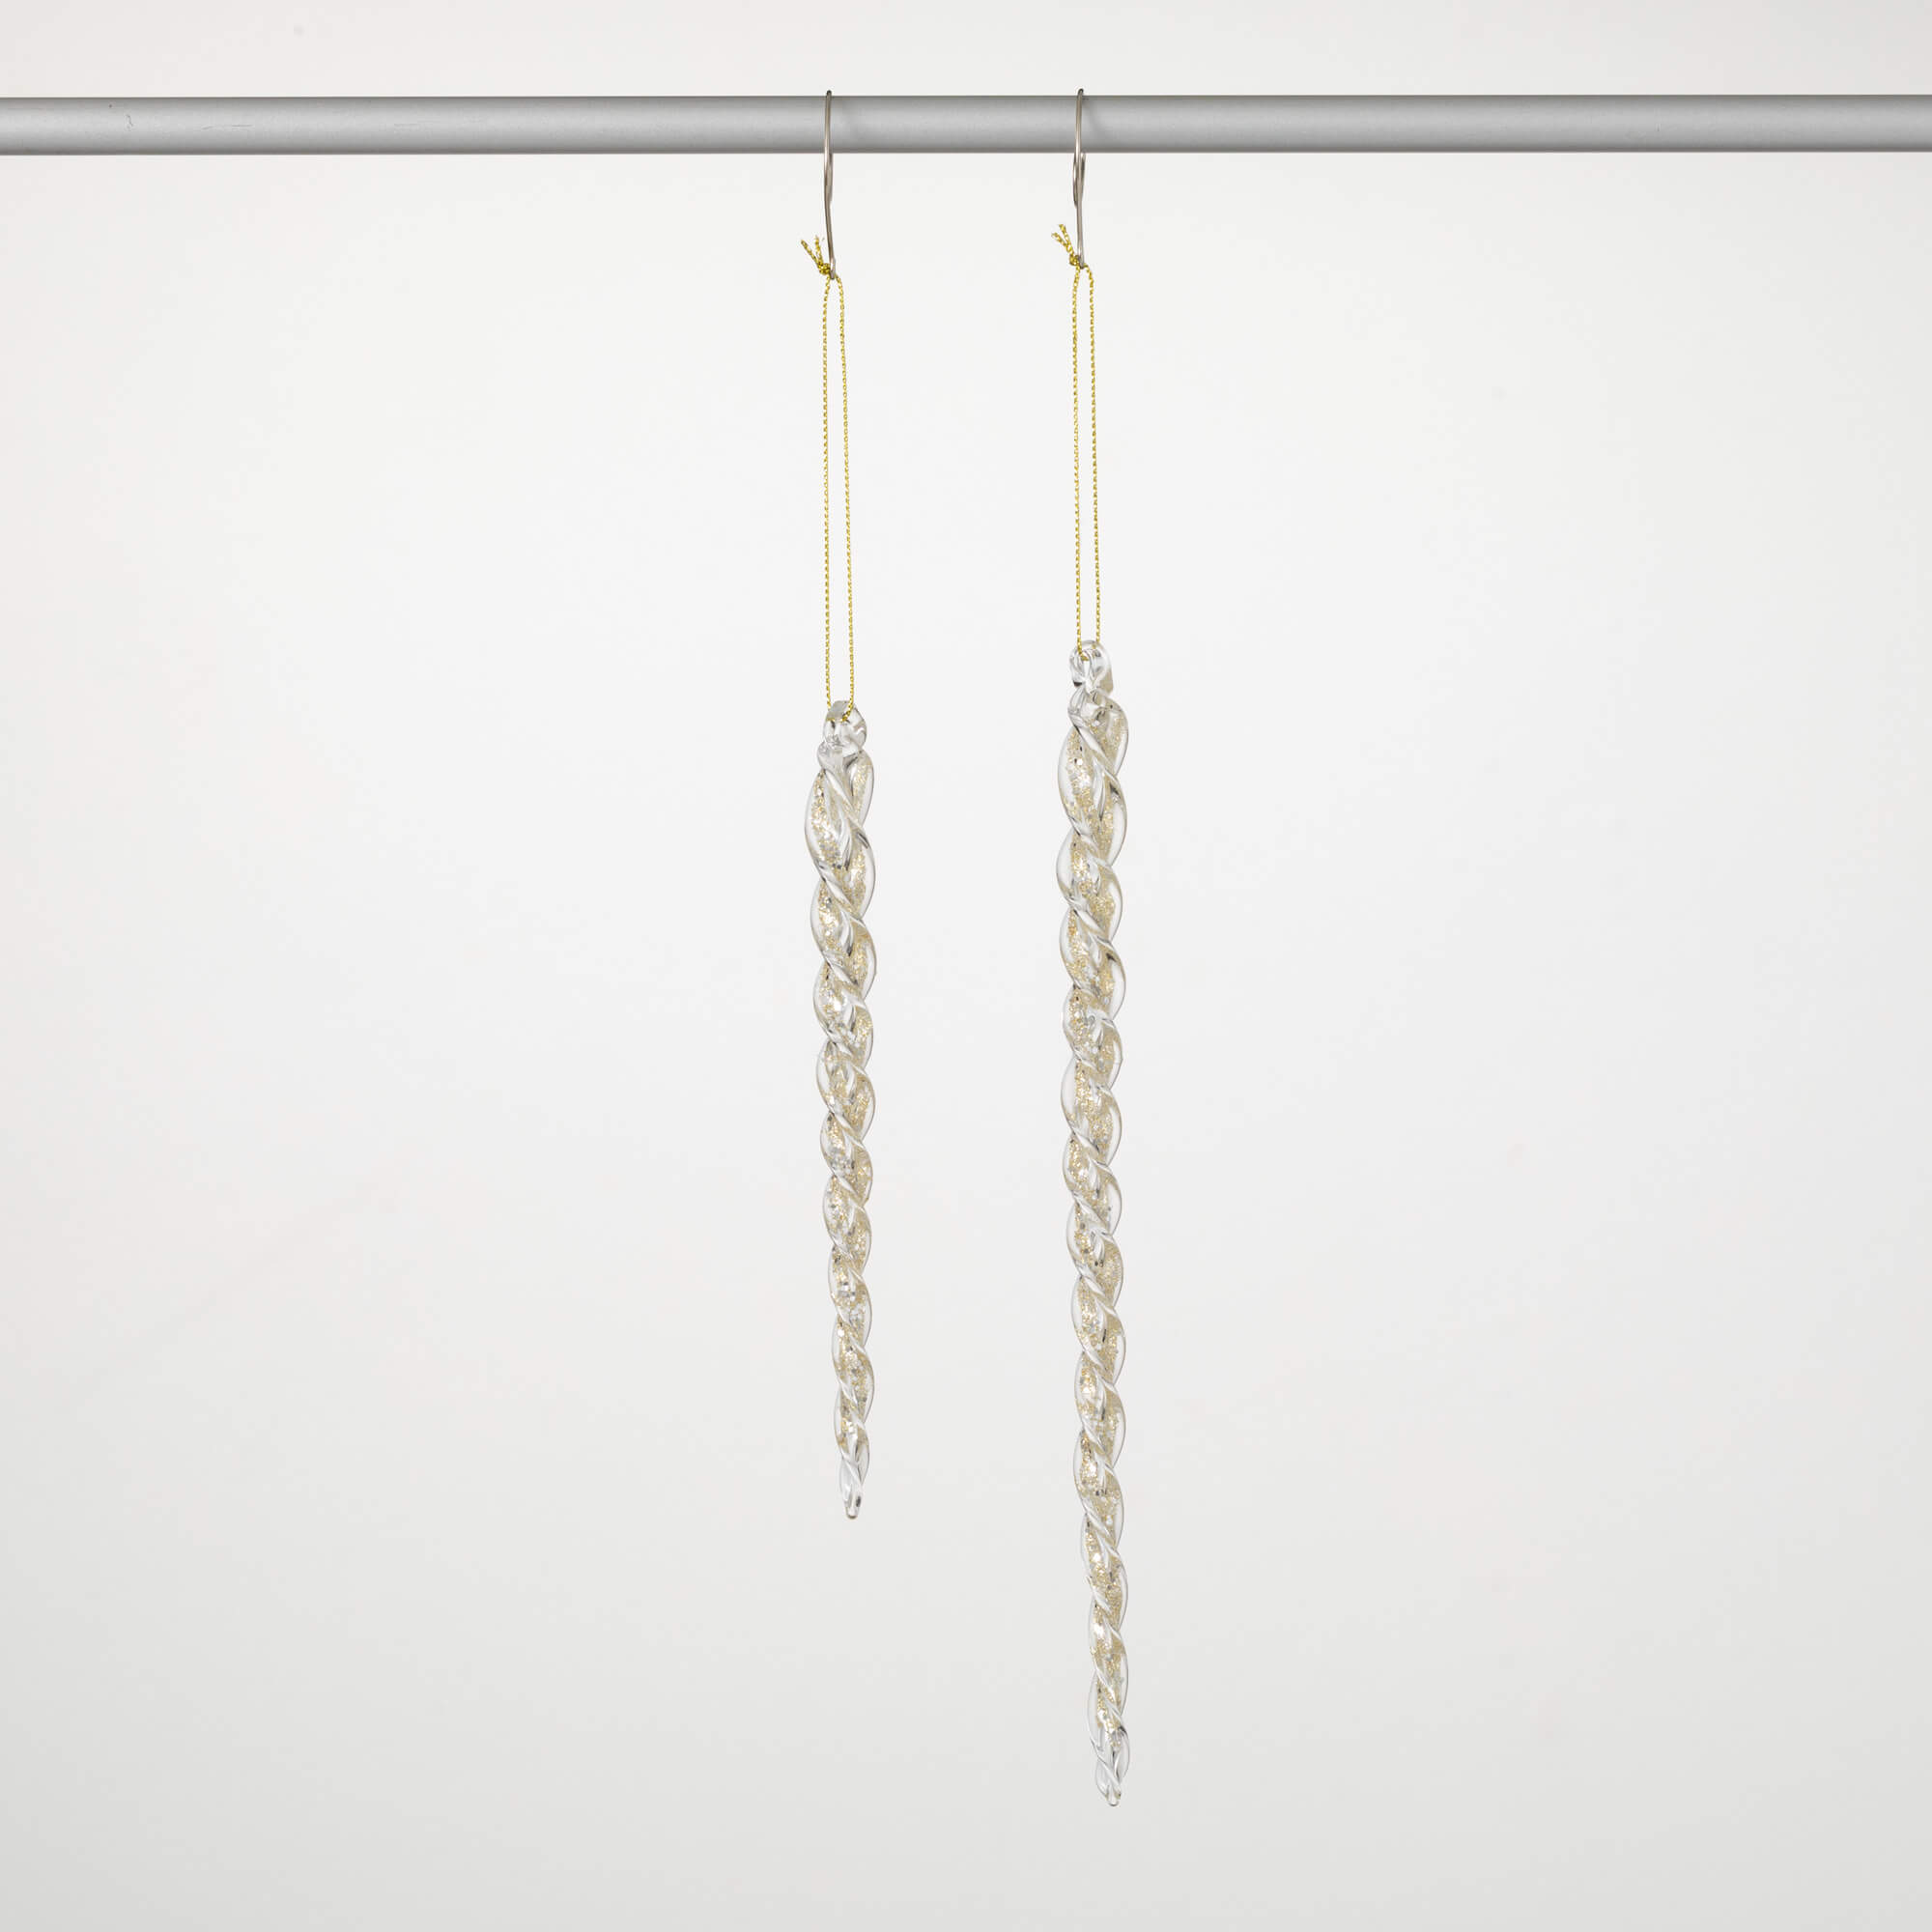 GOLD ACCENTED ICICLE ORNAMENTS